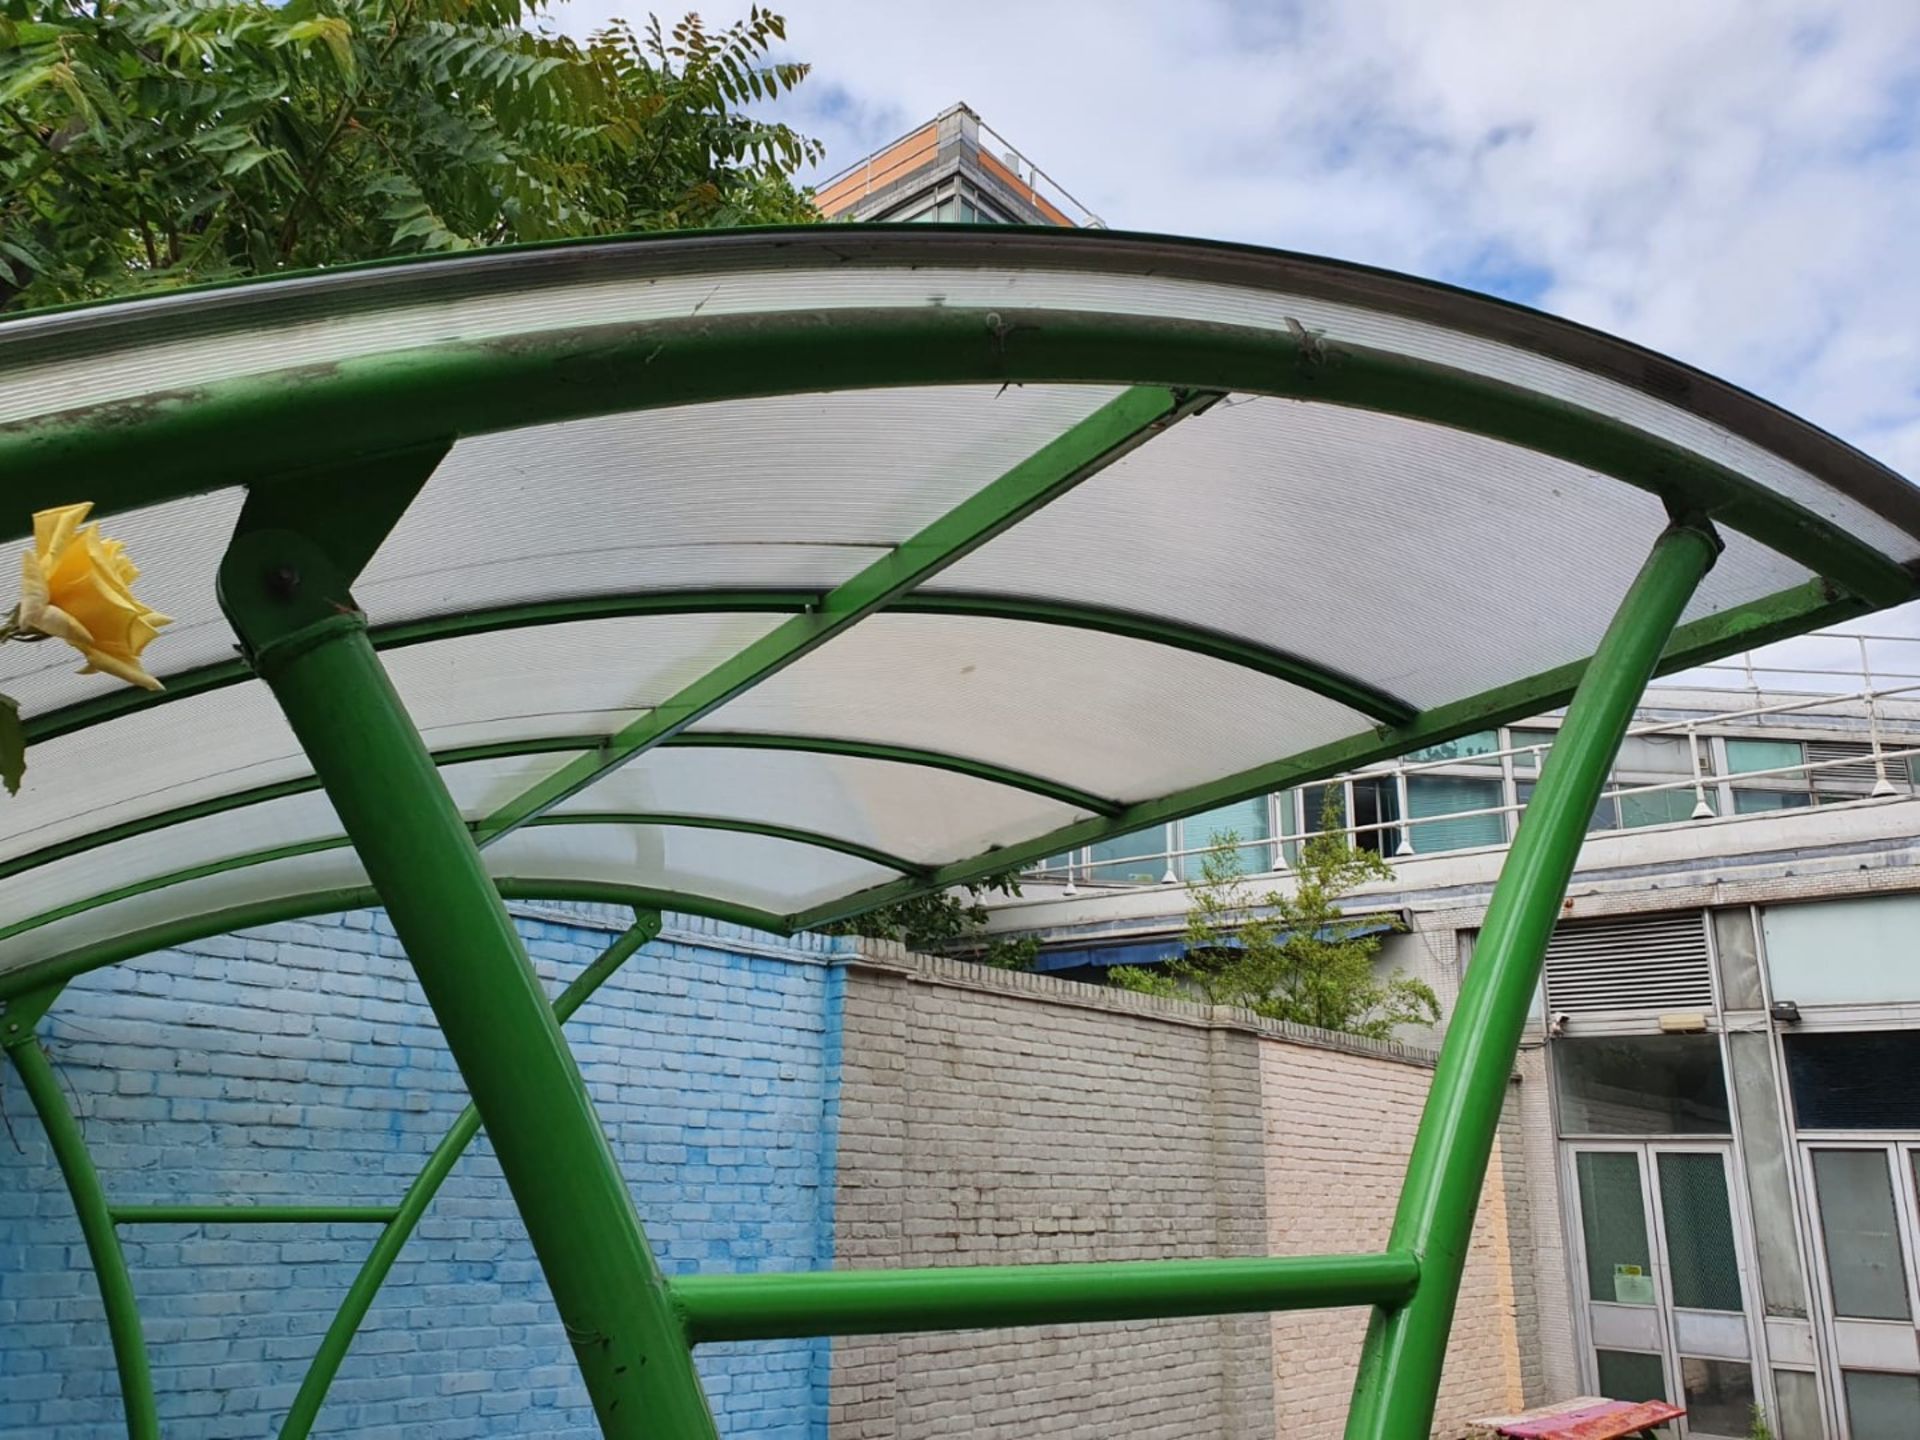 1 x Bike Shelter With Bike Racks - Suitable For Upto 8 Bikes - Contemporary Design - Suitable For - Image 4 of 9